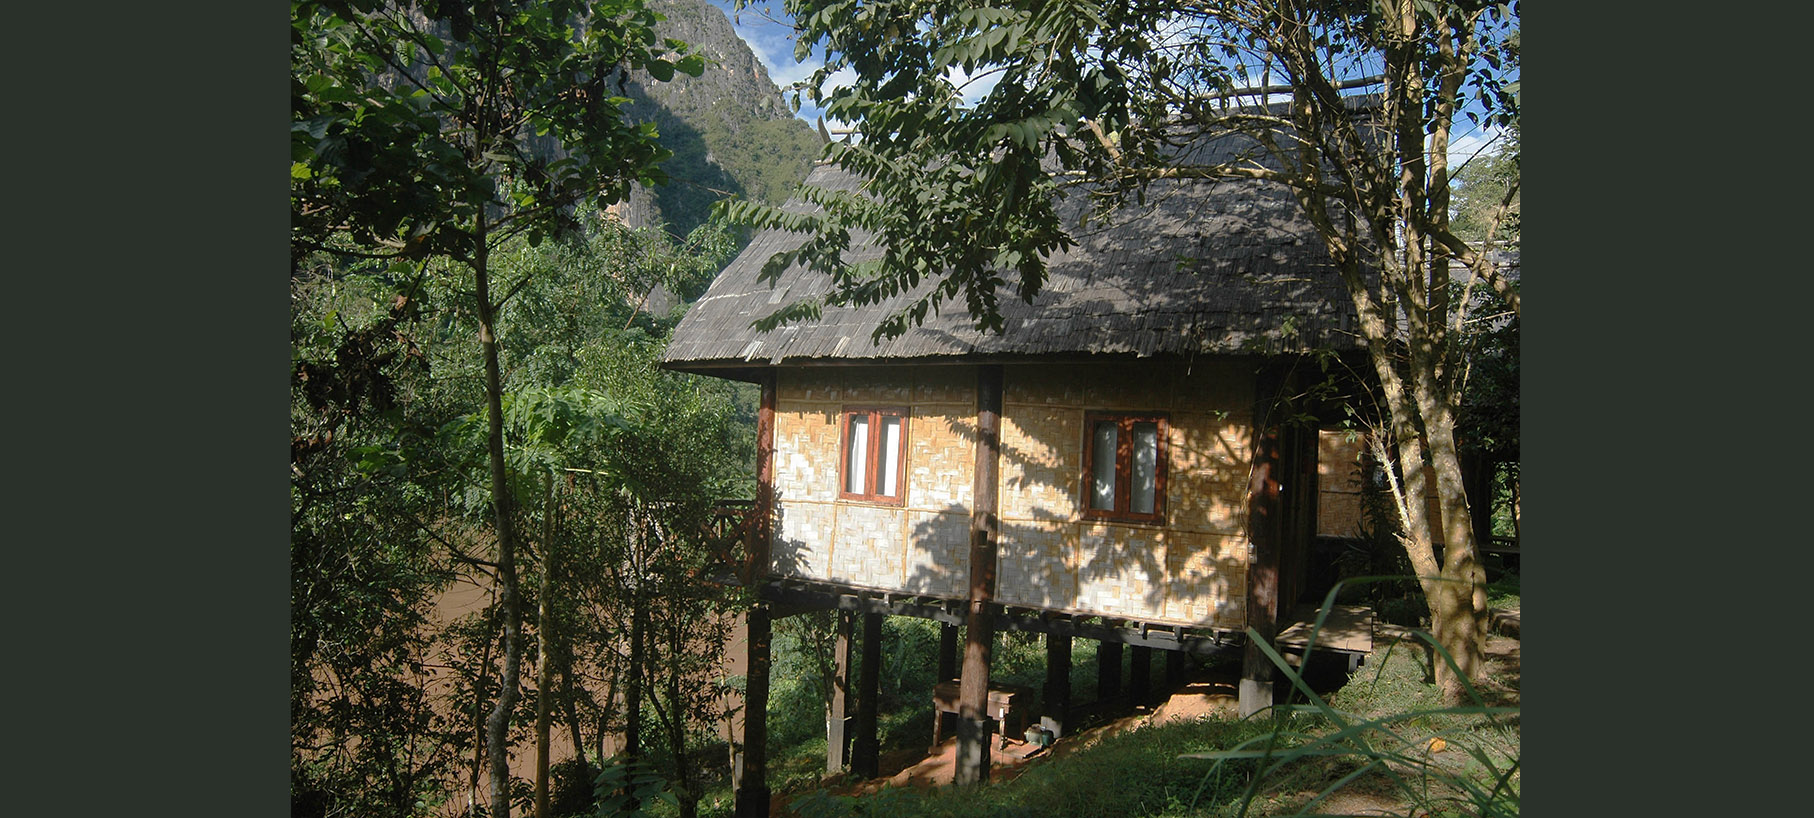 Cottage and trees Kong Khiaw